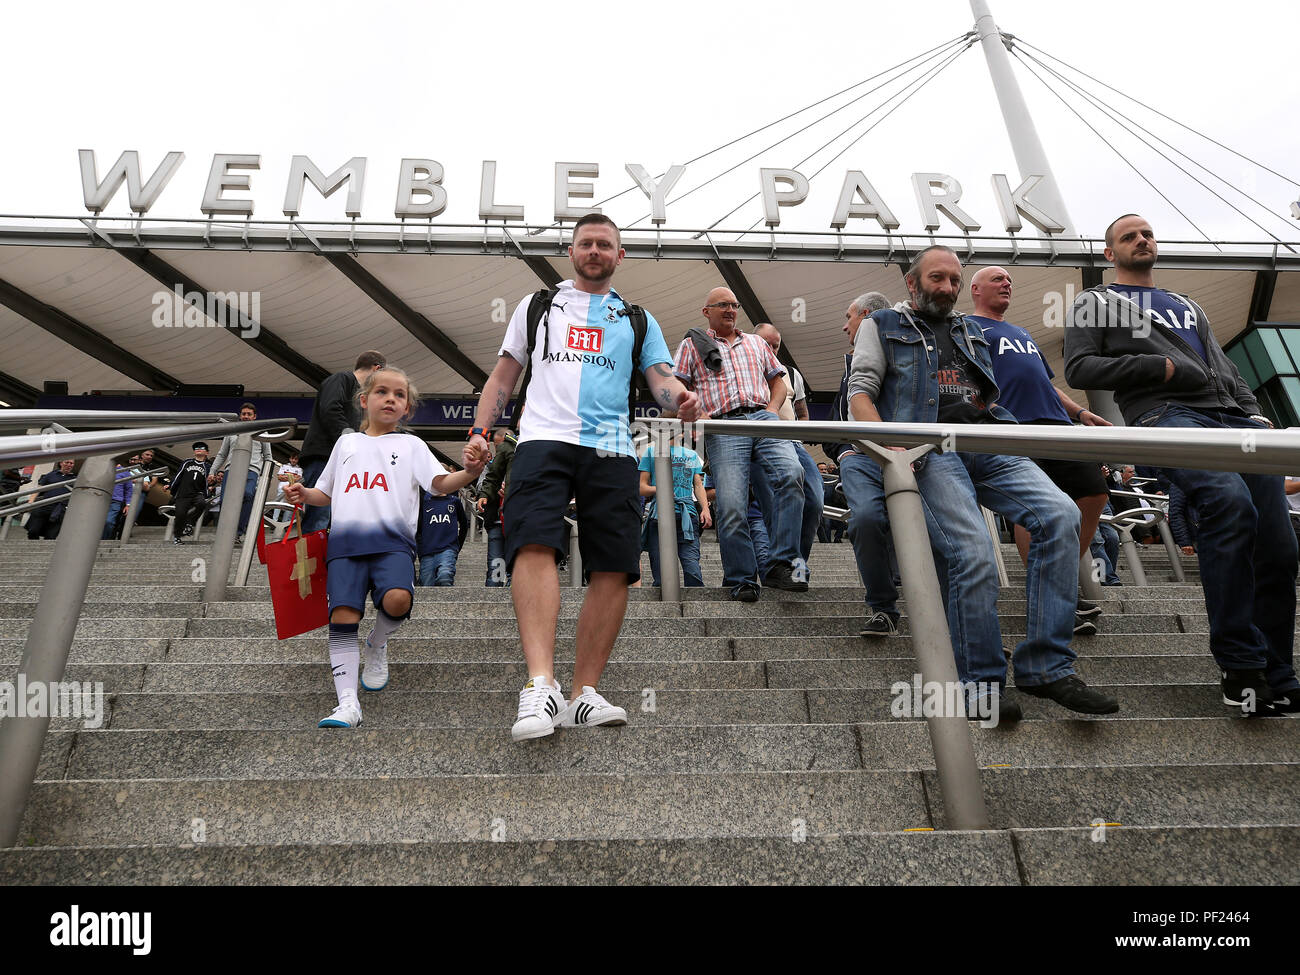 Tottenham Hotspur fans arriving to the ground before the Premier League match at Wembley Stadium, London. PRESS ASSOCIATION Photo. Picture date: Saturday August 18, 2018. See PA story SOCCER Tottenham. Photo credit should read: Nick Potts/PA Wire. RESTRICTIONS: No use with unauthorised audio, video, data, fixture lists, club/league logos or 'live' services. Online in-match use limited to 120 images, no video emulation. No use in betting, games or single club/league/player publications. Stock Photo